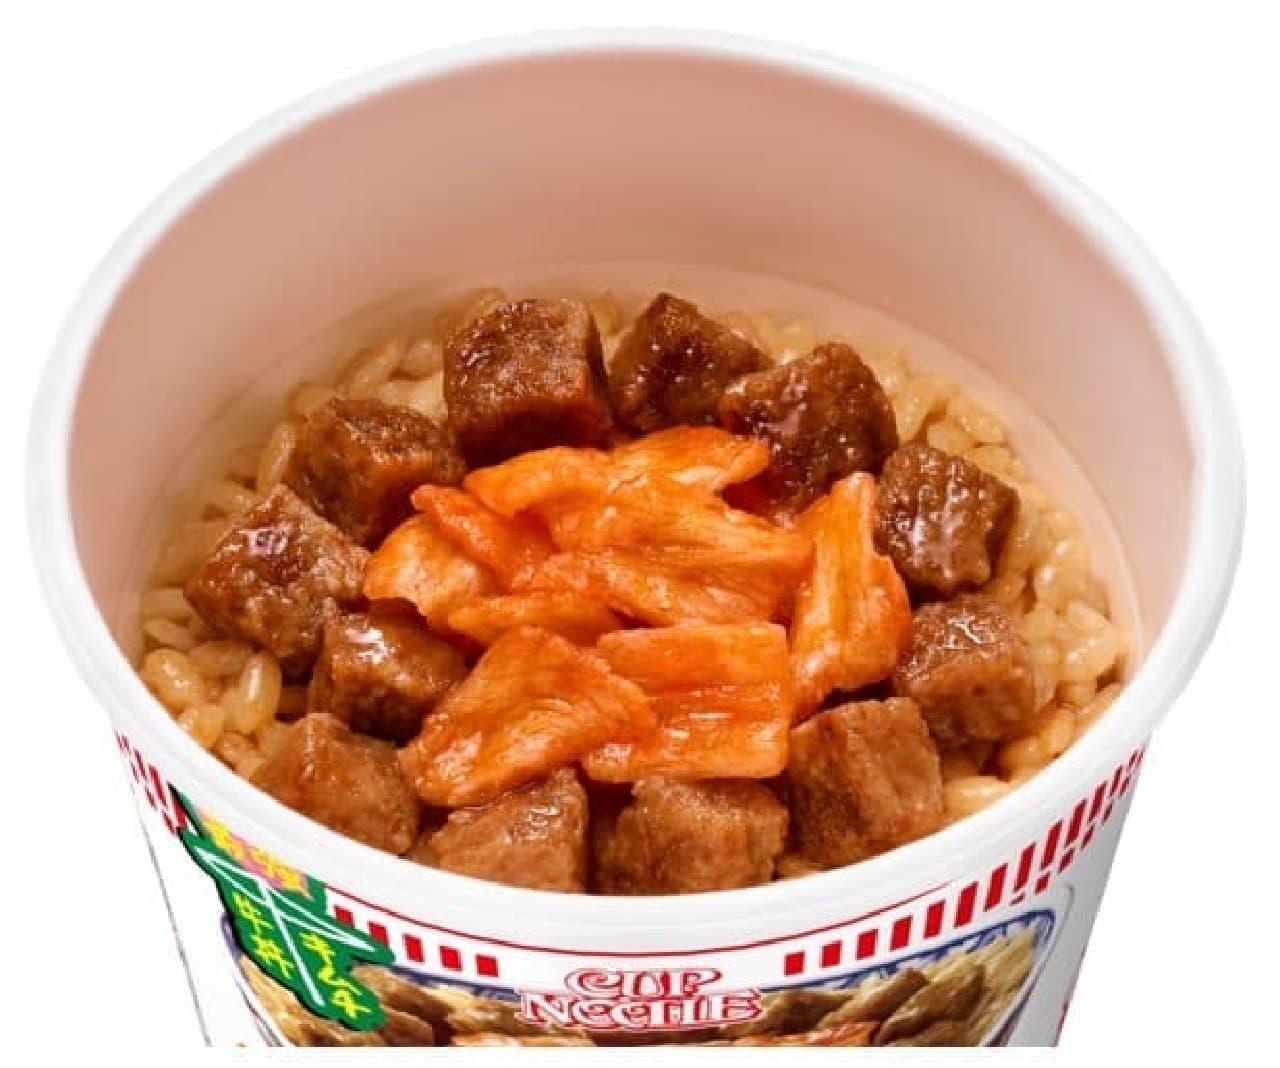 Nisshin Foods "Cup Noodle Mysterious Meat Kimchi Beef Bowl"